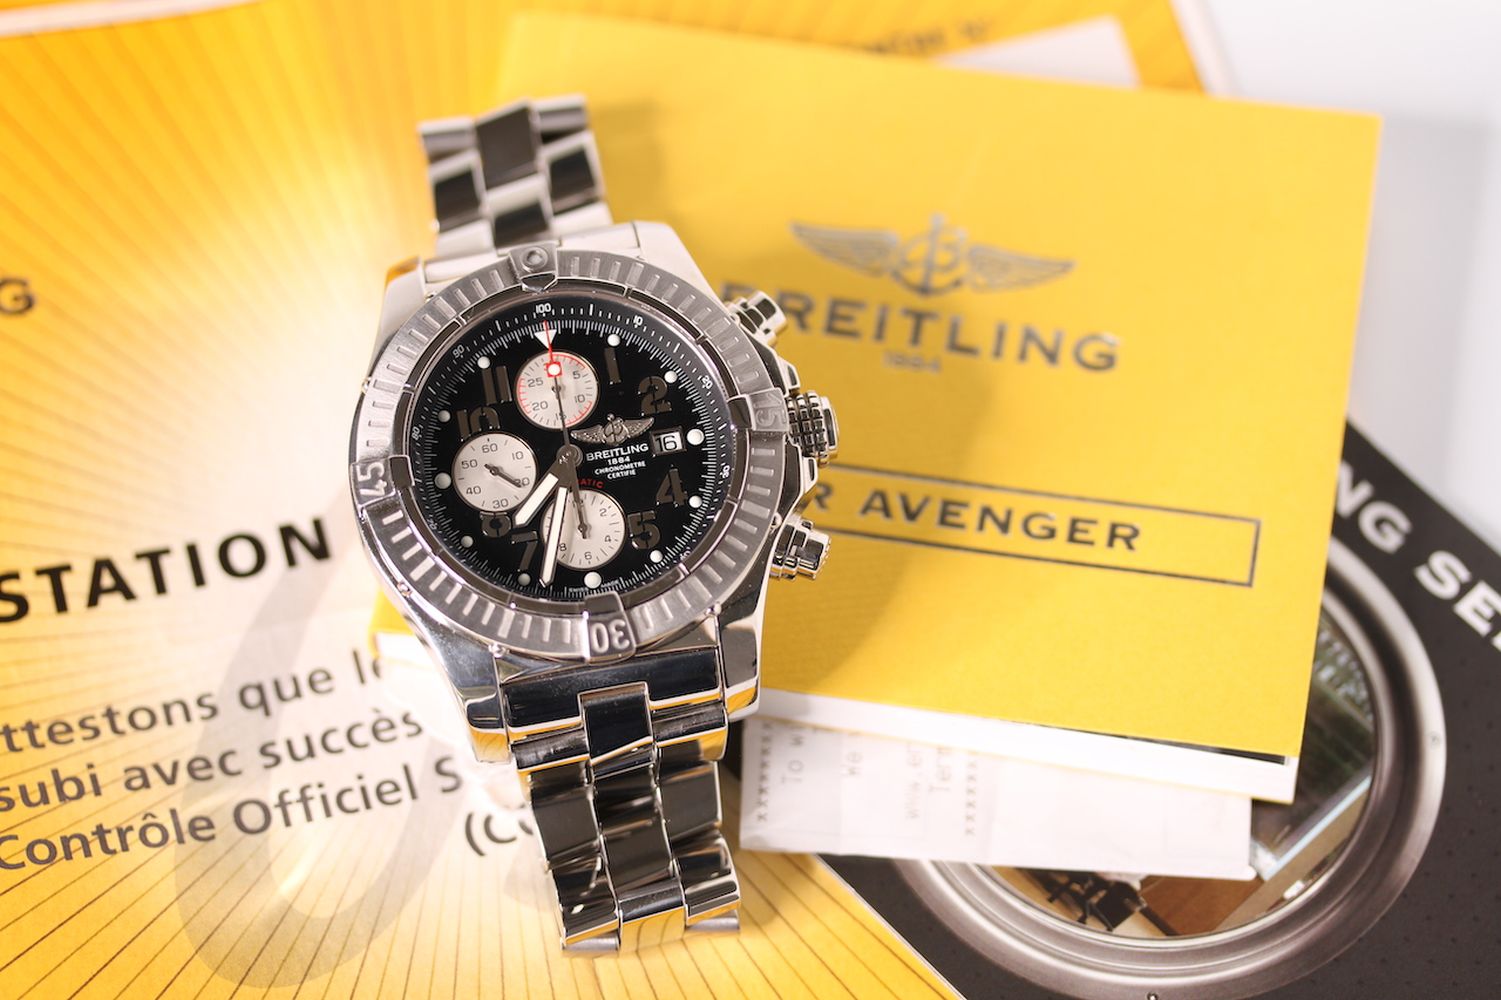 GENTLEMENS BREITLING SUPER AVENGER WRISTWATCH REF A13370 W/BOX & PAPERS, circular black dial with